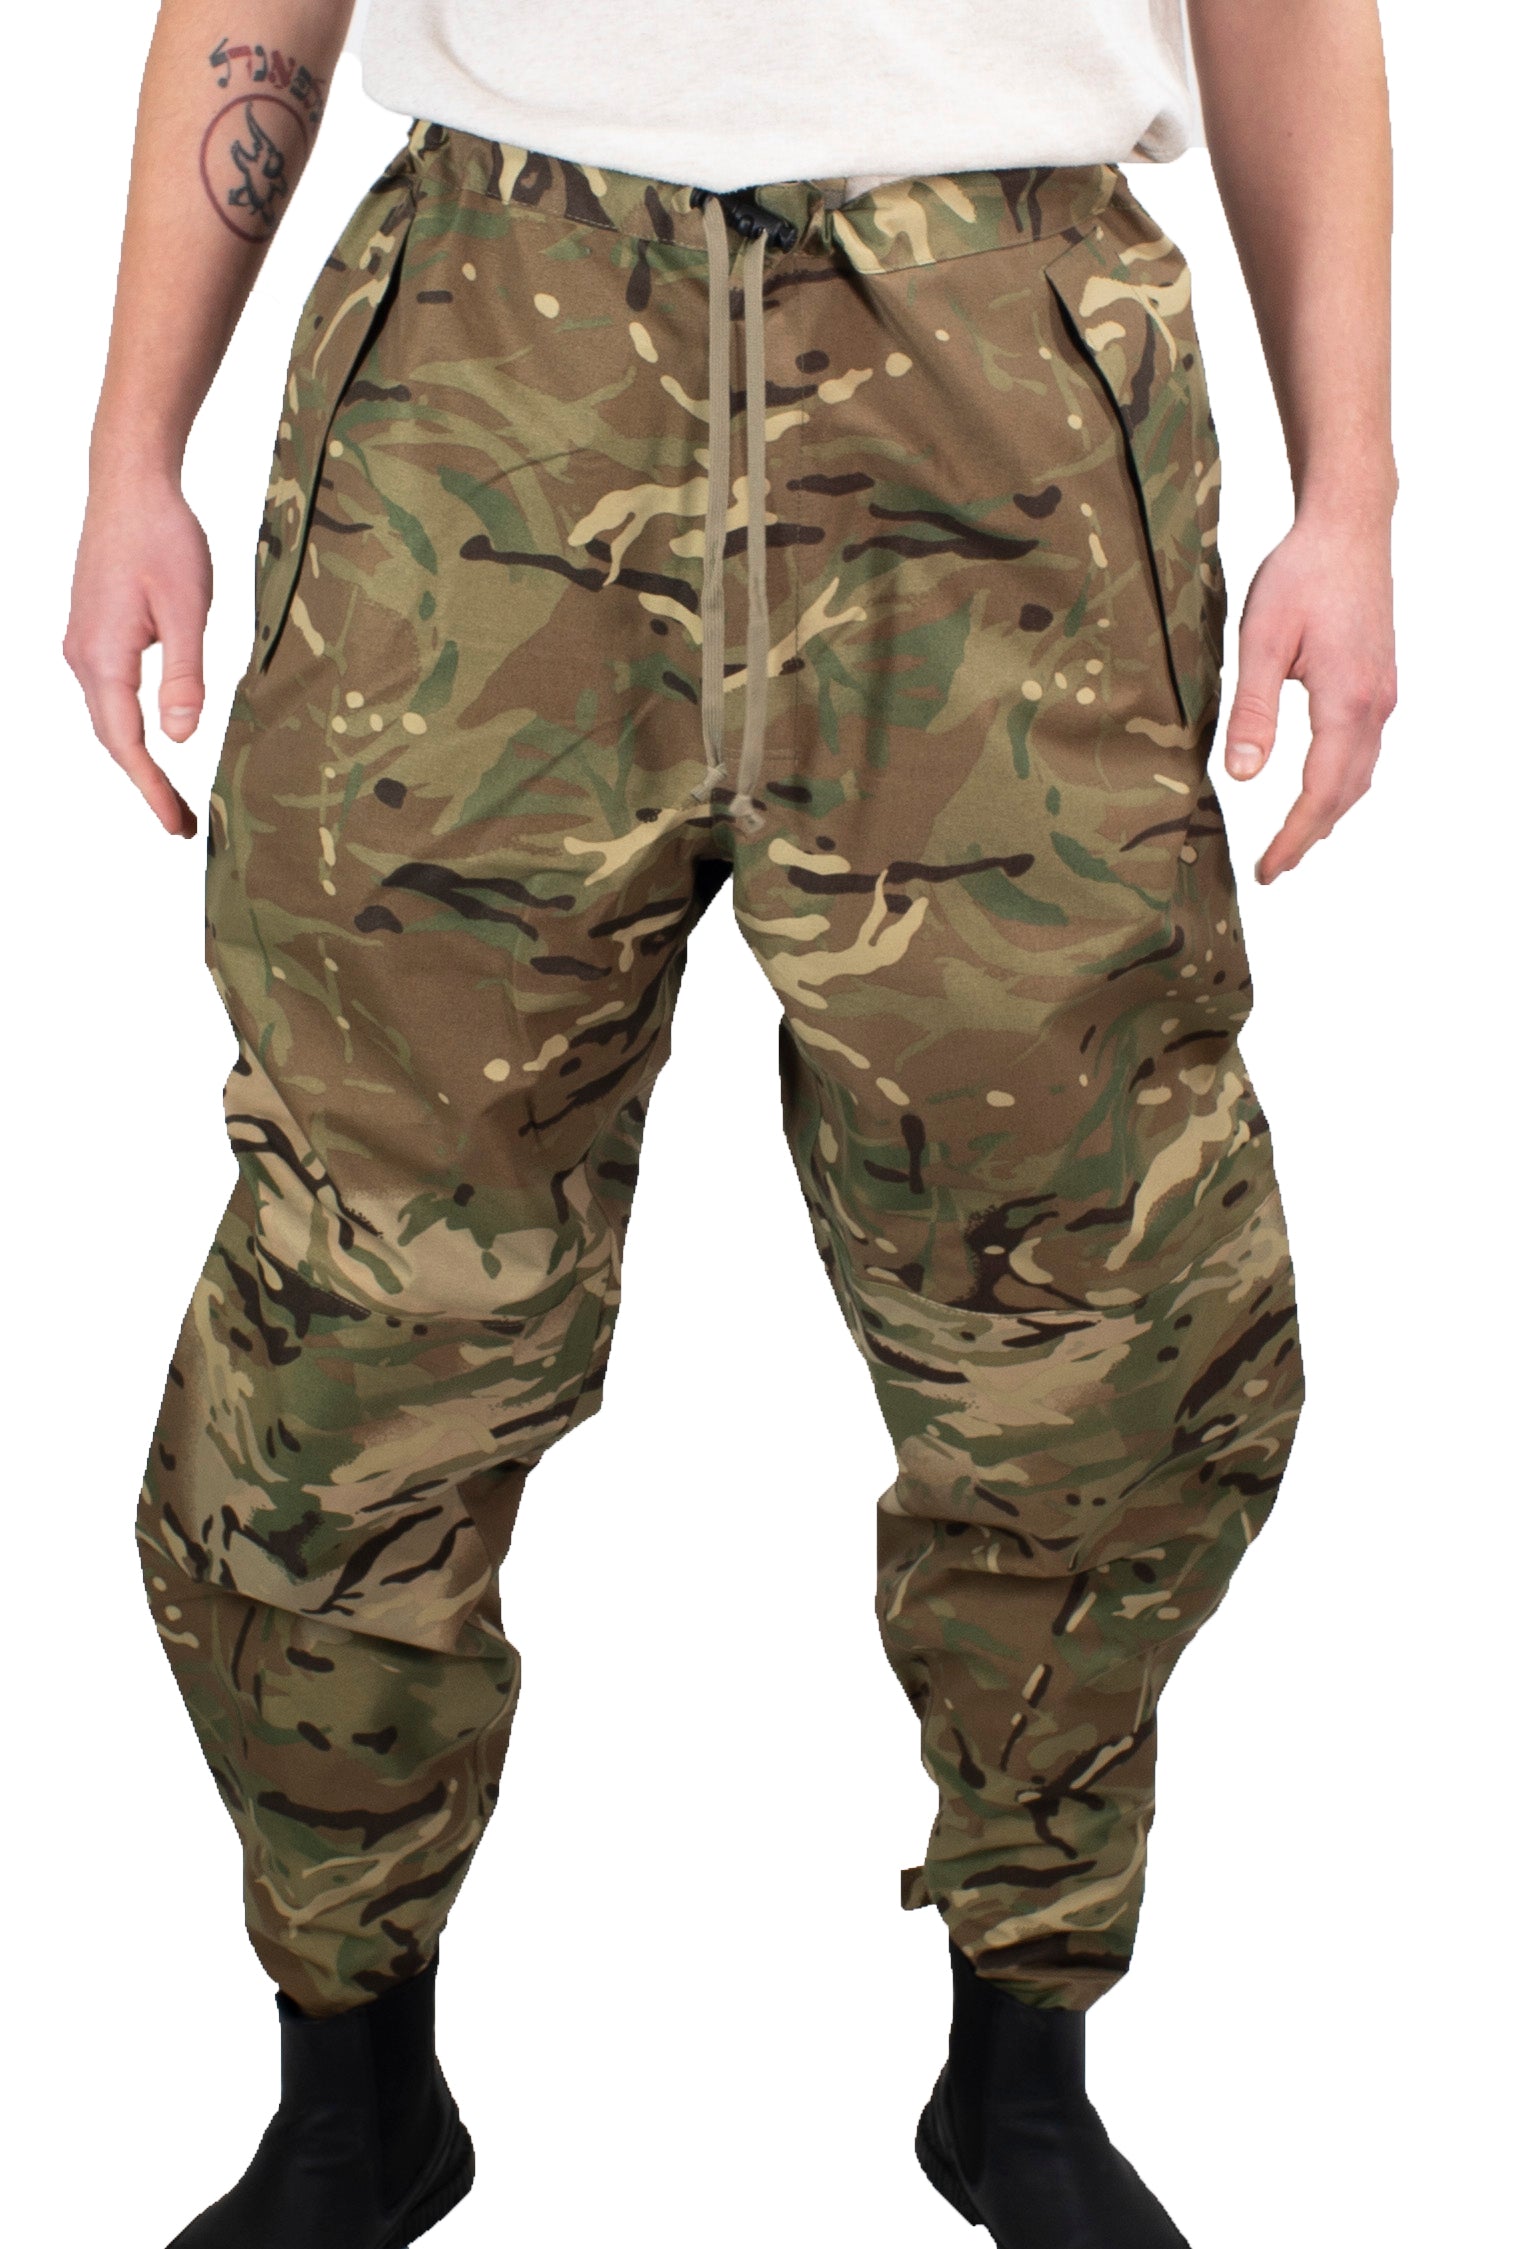 British Army Gore-Tex Over-Trousers – MTP Camo – heavyweight – Unissued